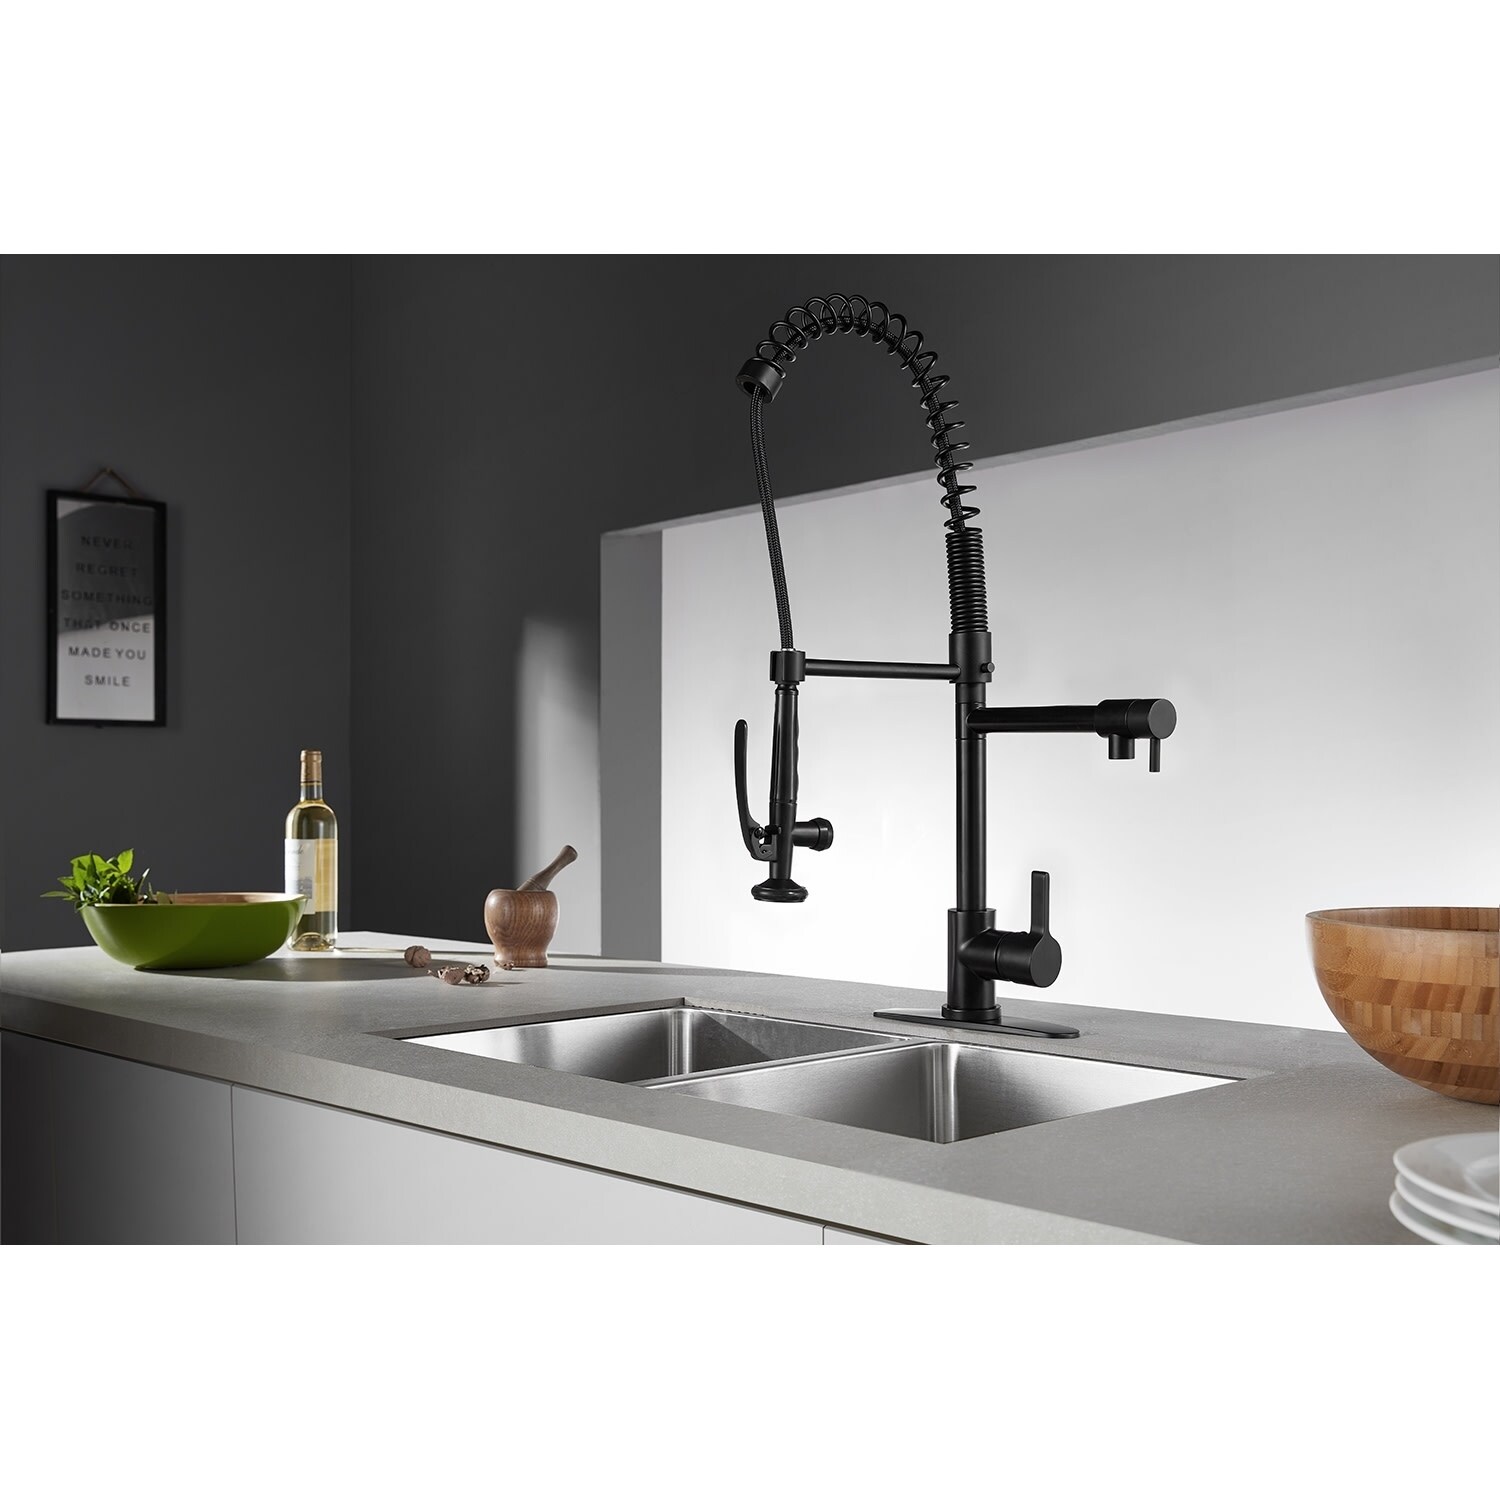 https://ak1.ostkcdn.com/images/products/30897431/Continental-Single-Handle-Pre-Rinse-Kitchen-Faucet-in-Matte-Black-43eddce9-5bff-4fe5-be69-53e774b4c634.jpg